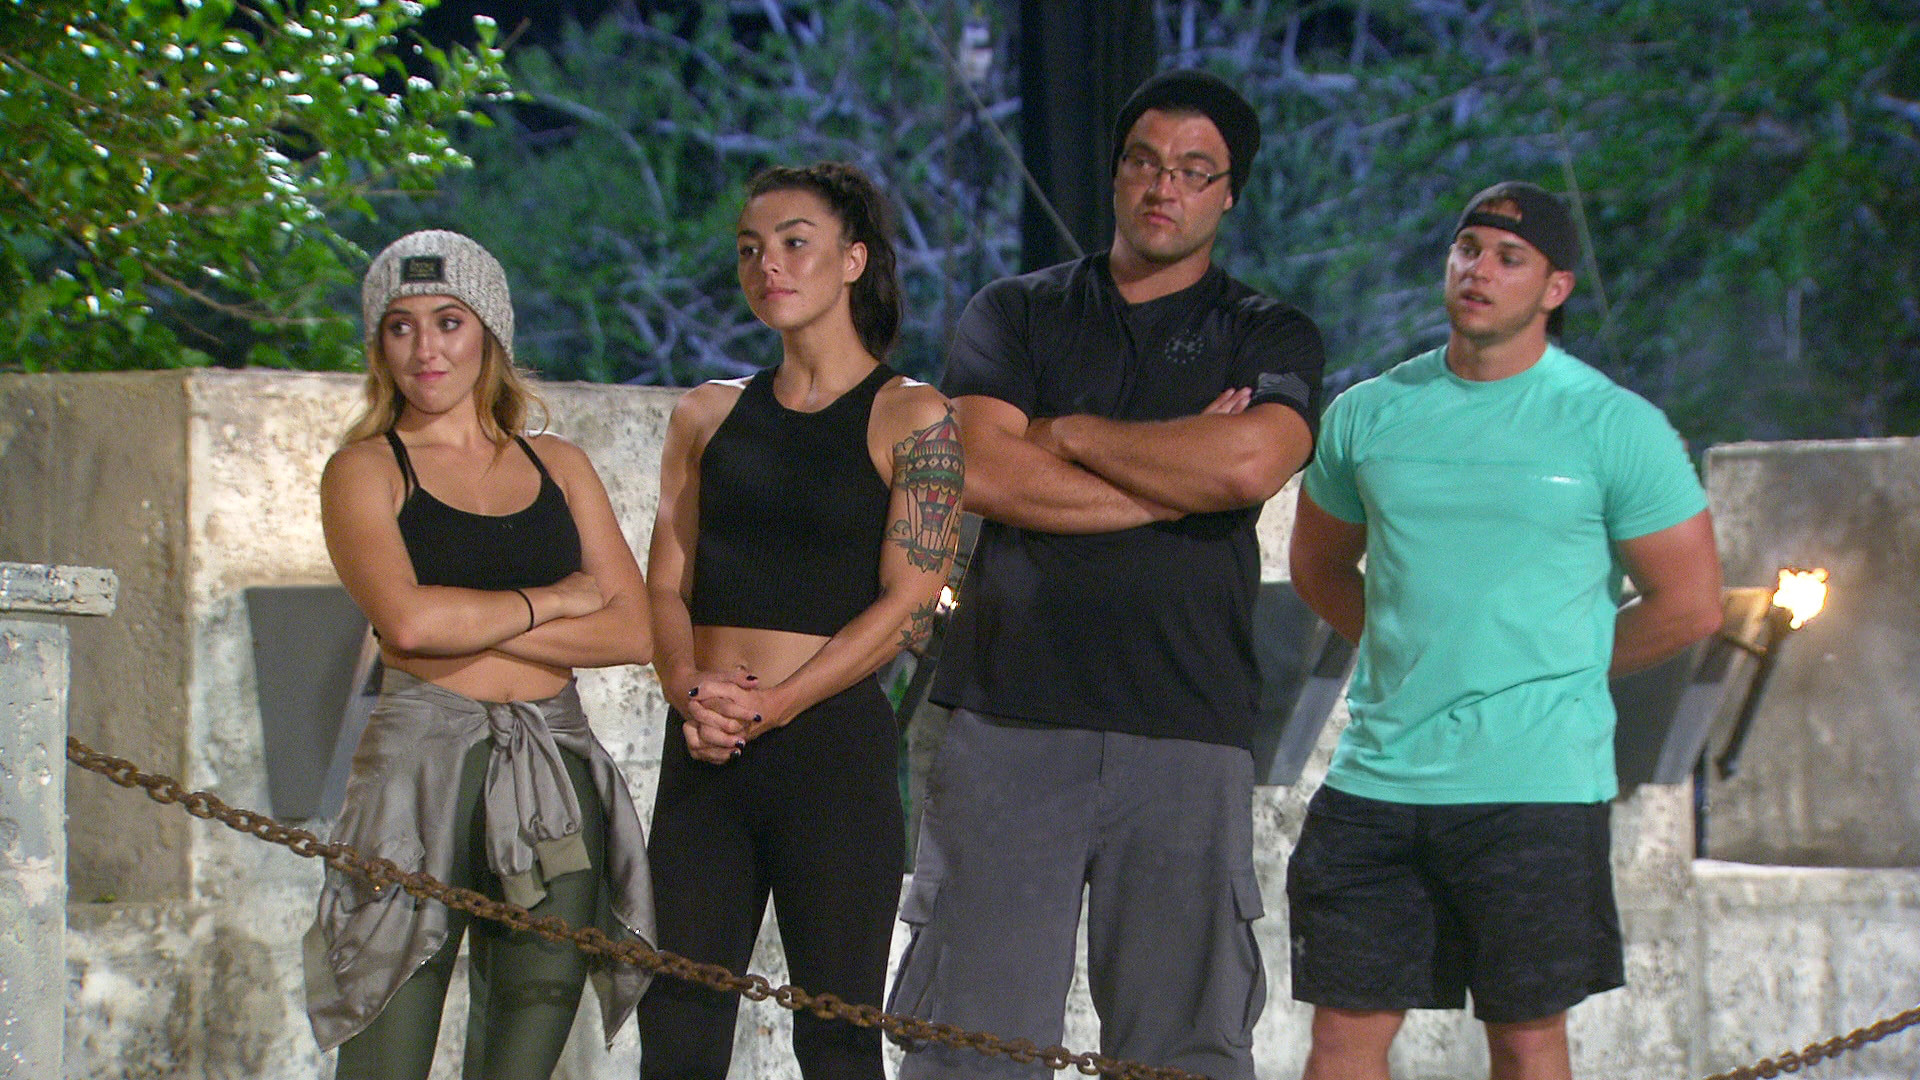 Watch The Challenge Season 30 Episode 12 Boxed In Full show on CBS